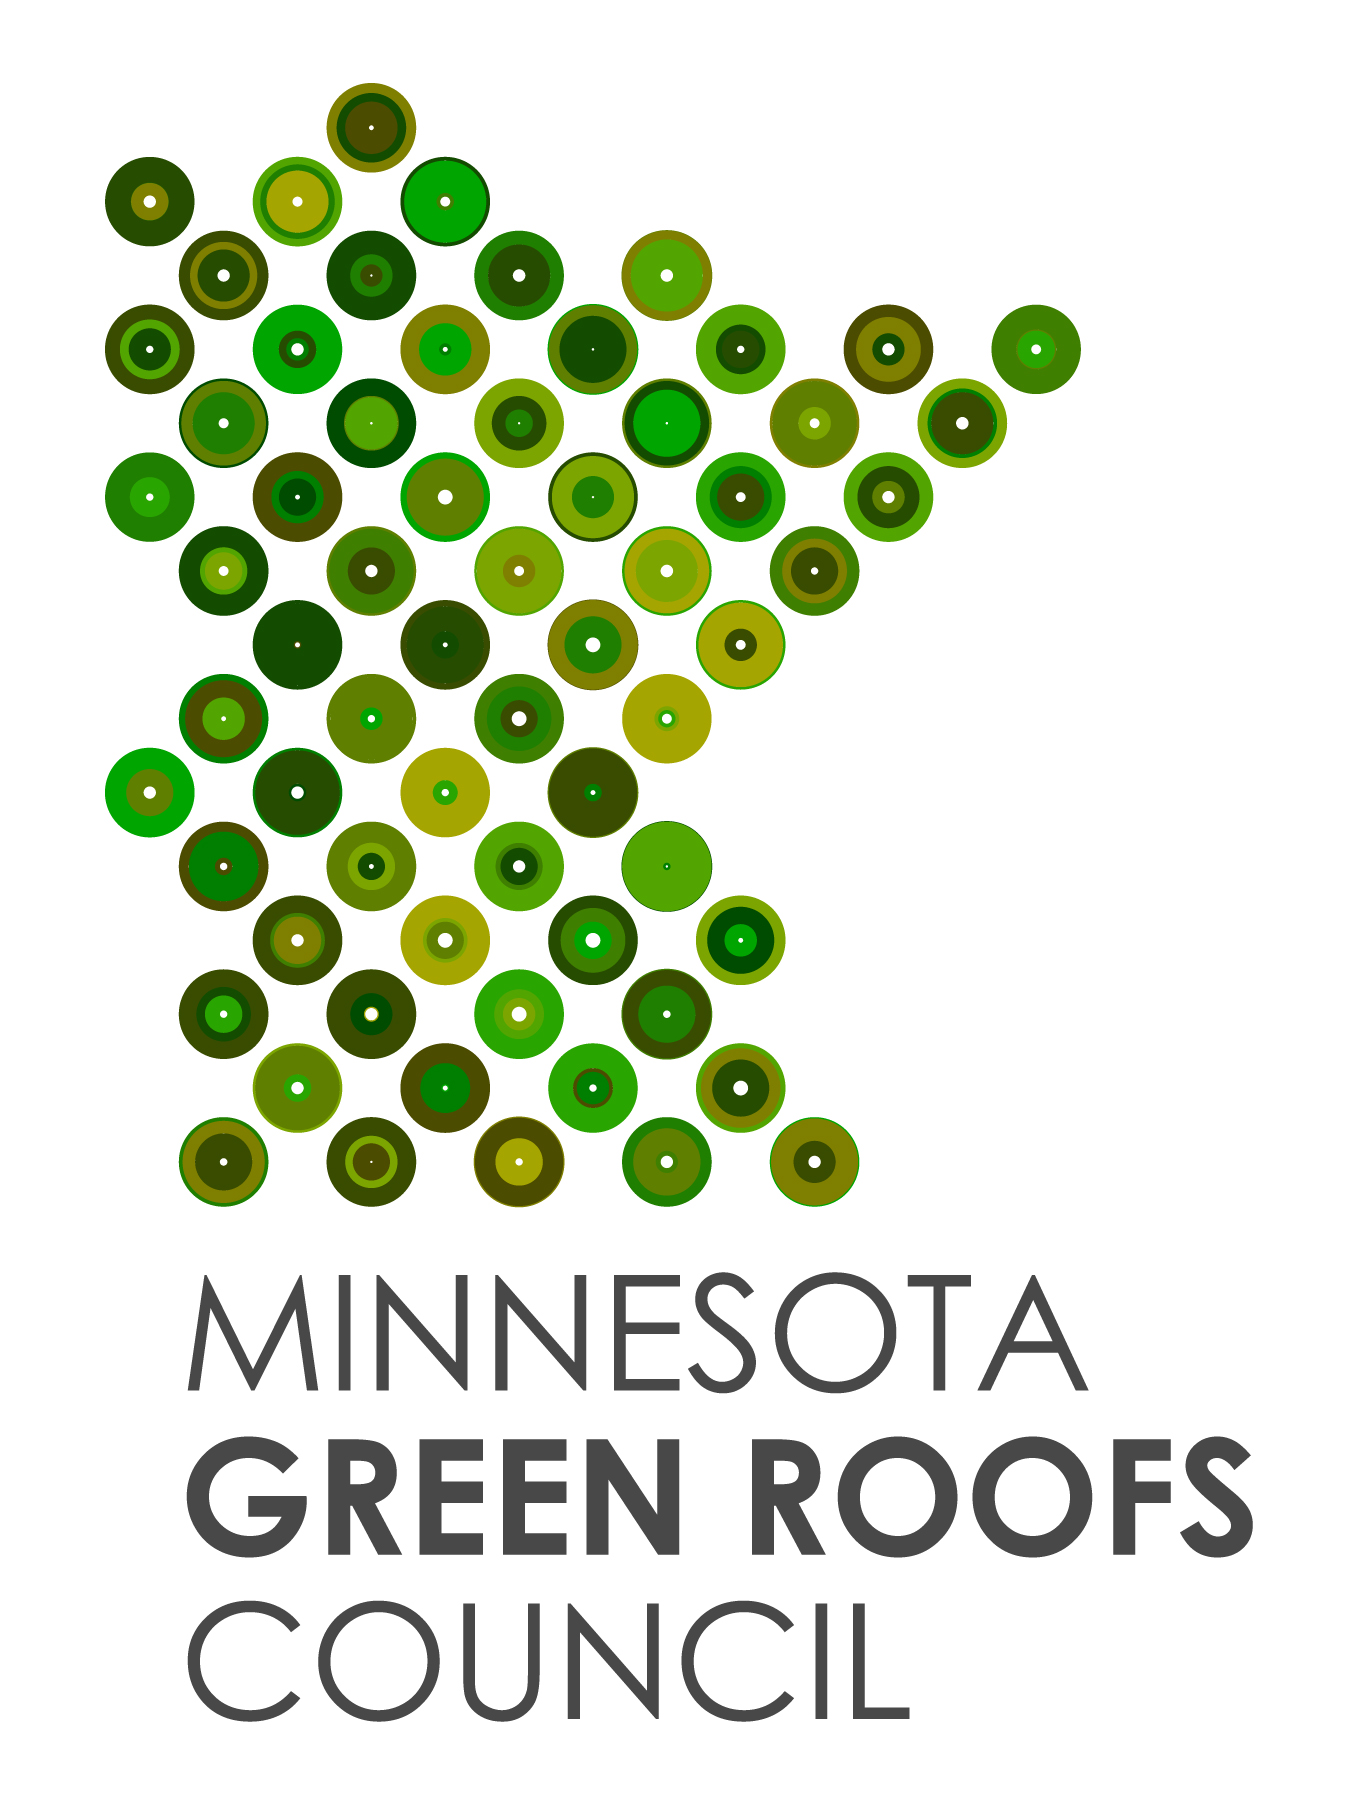 Non-profit committed to promoting green roofs to benefit the environment and economy in Minnesota